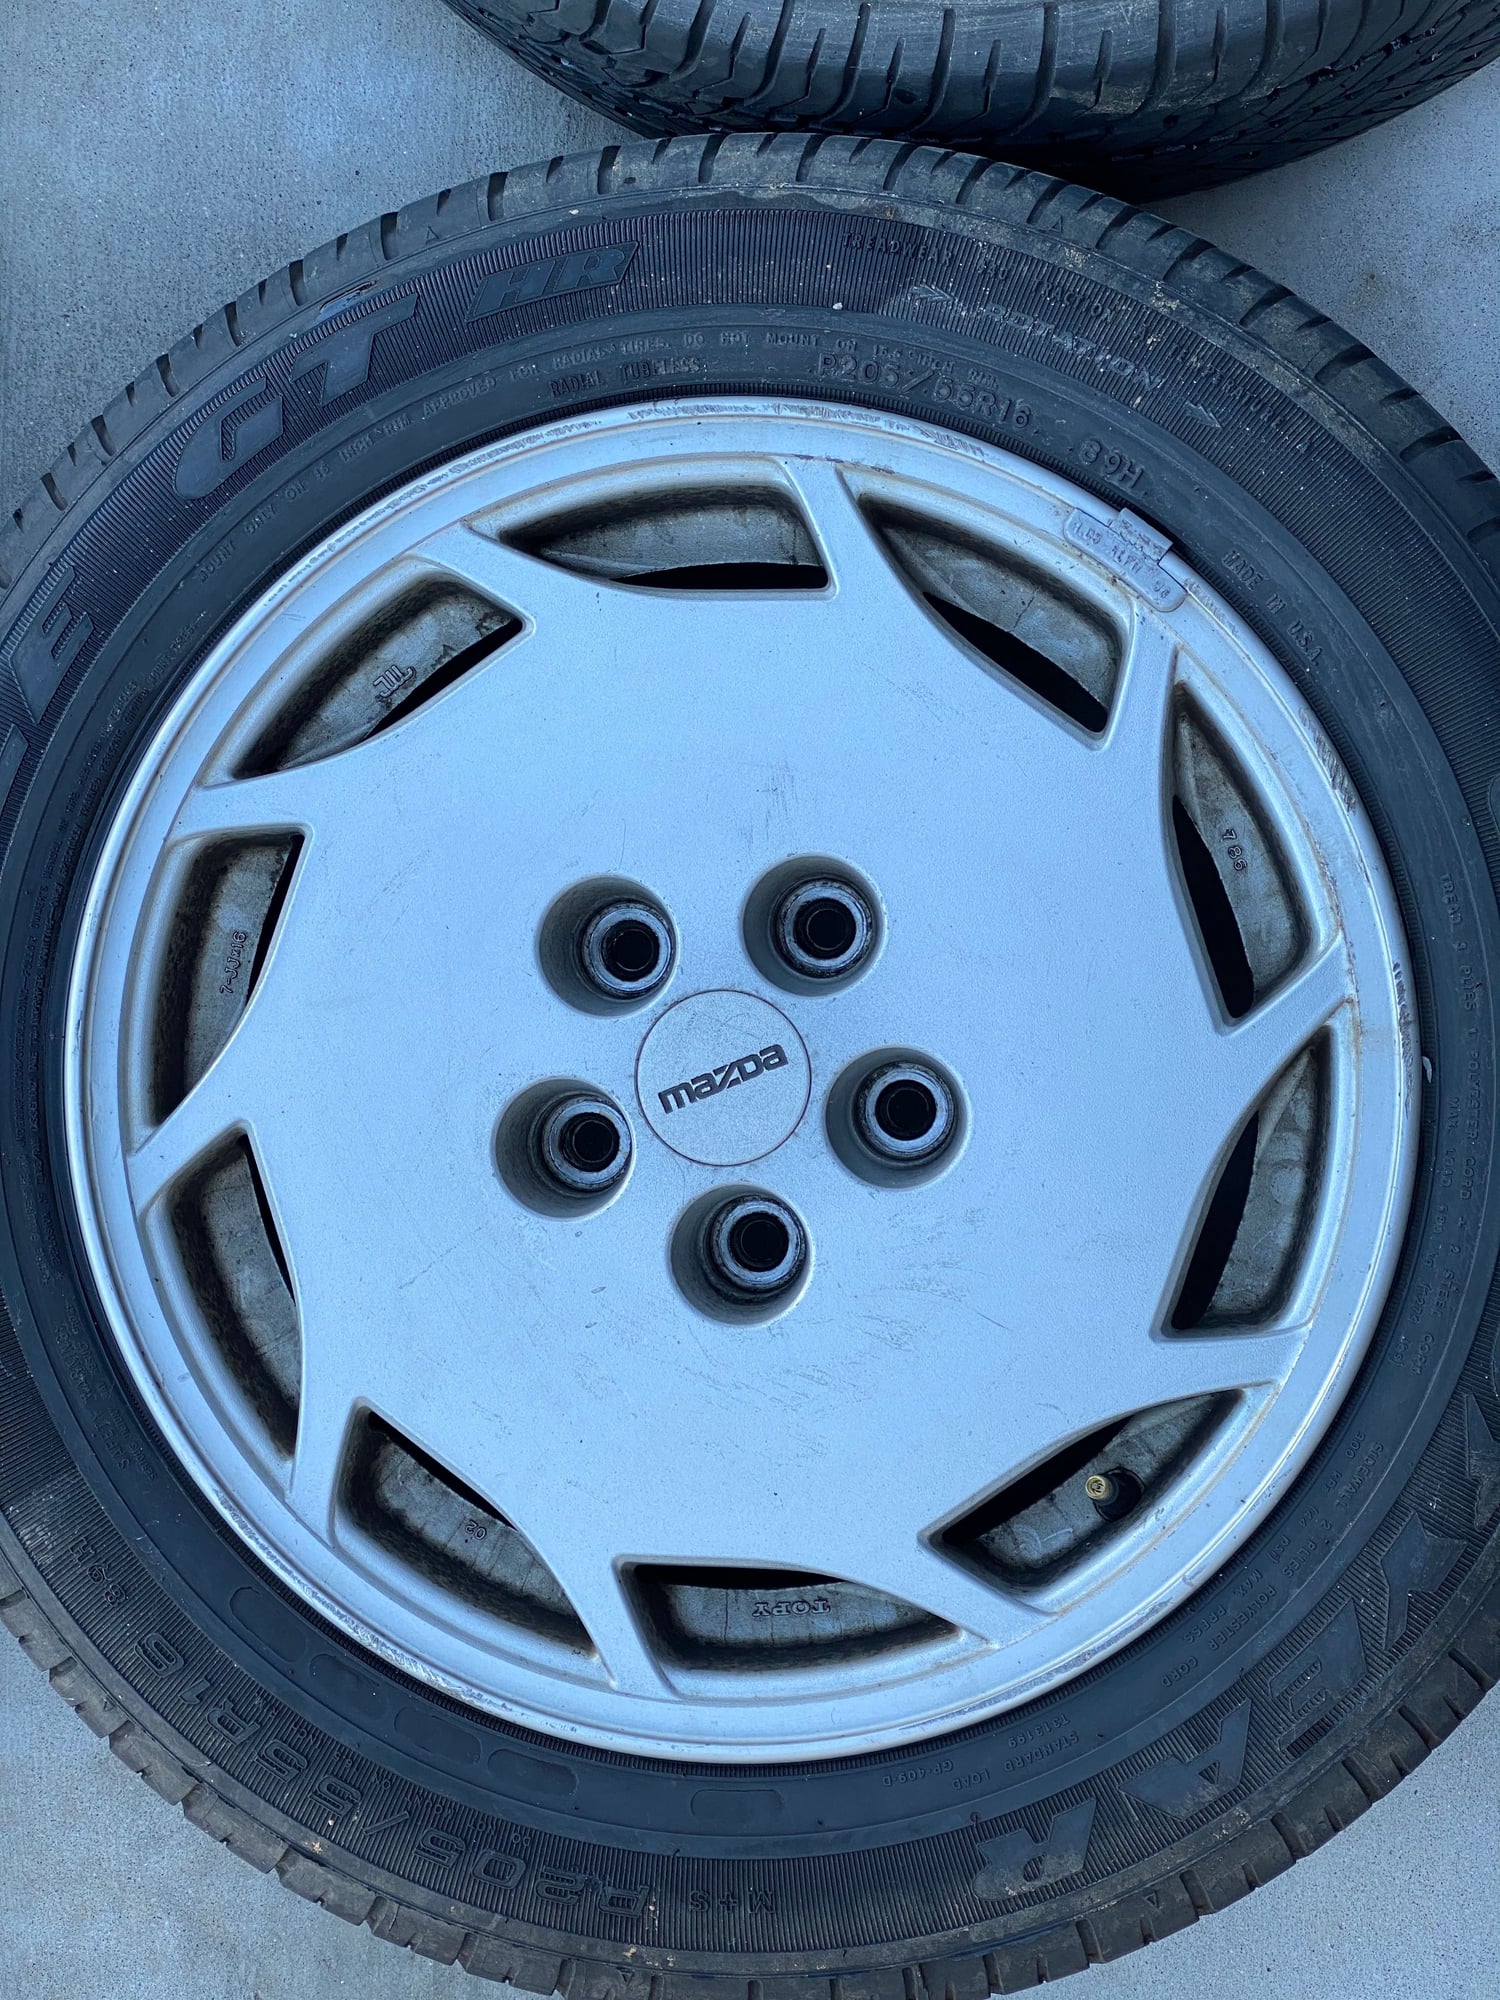 Wheels and Tires/Axles - OEM RX7 Sawblade Wheels and Goodyear Tires - Used - 1986 to 1989 Mazda RX-7 - Maricopa, AZ 85138, United States